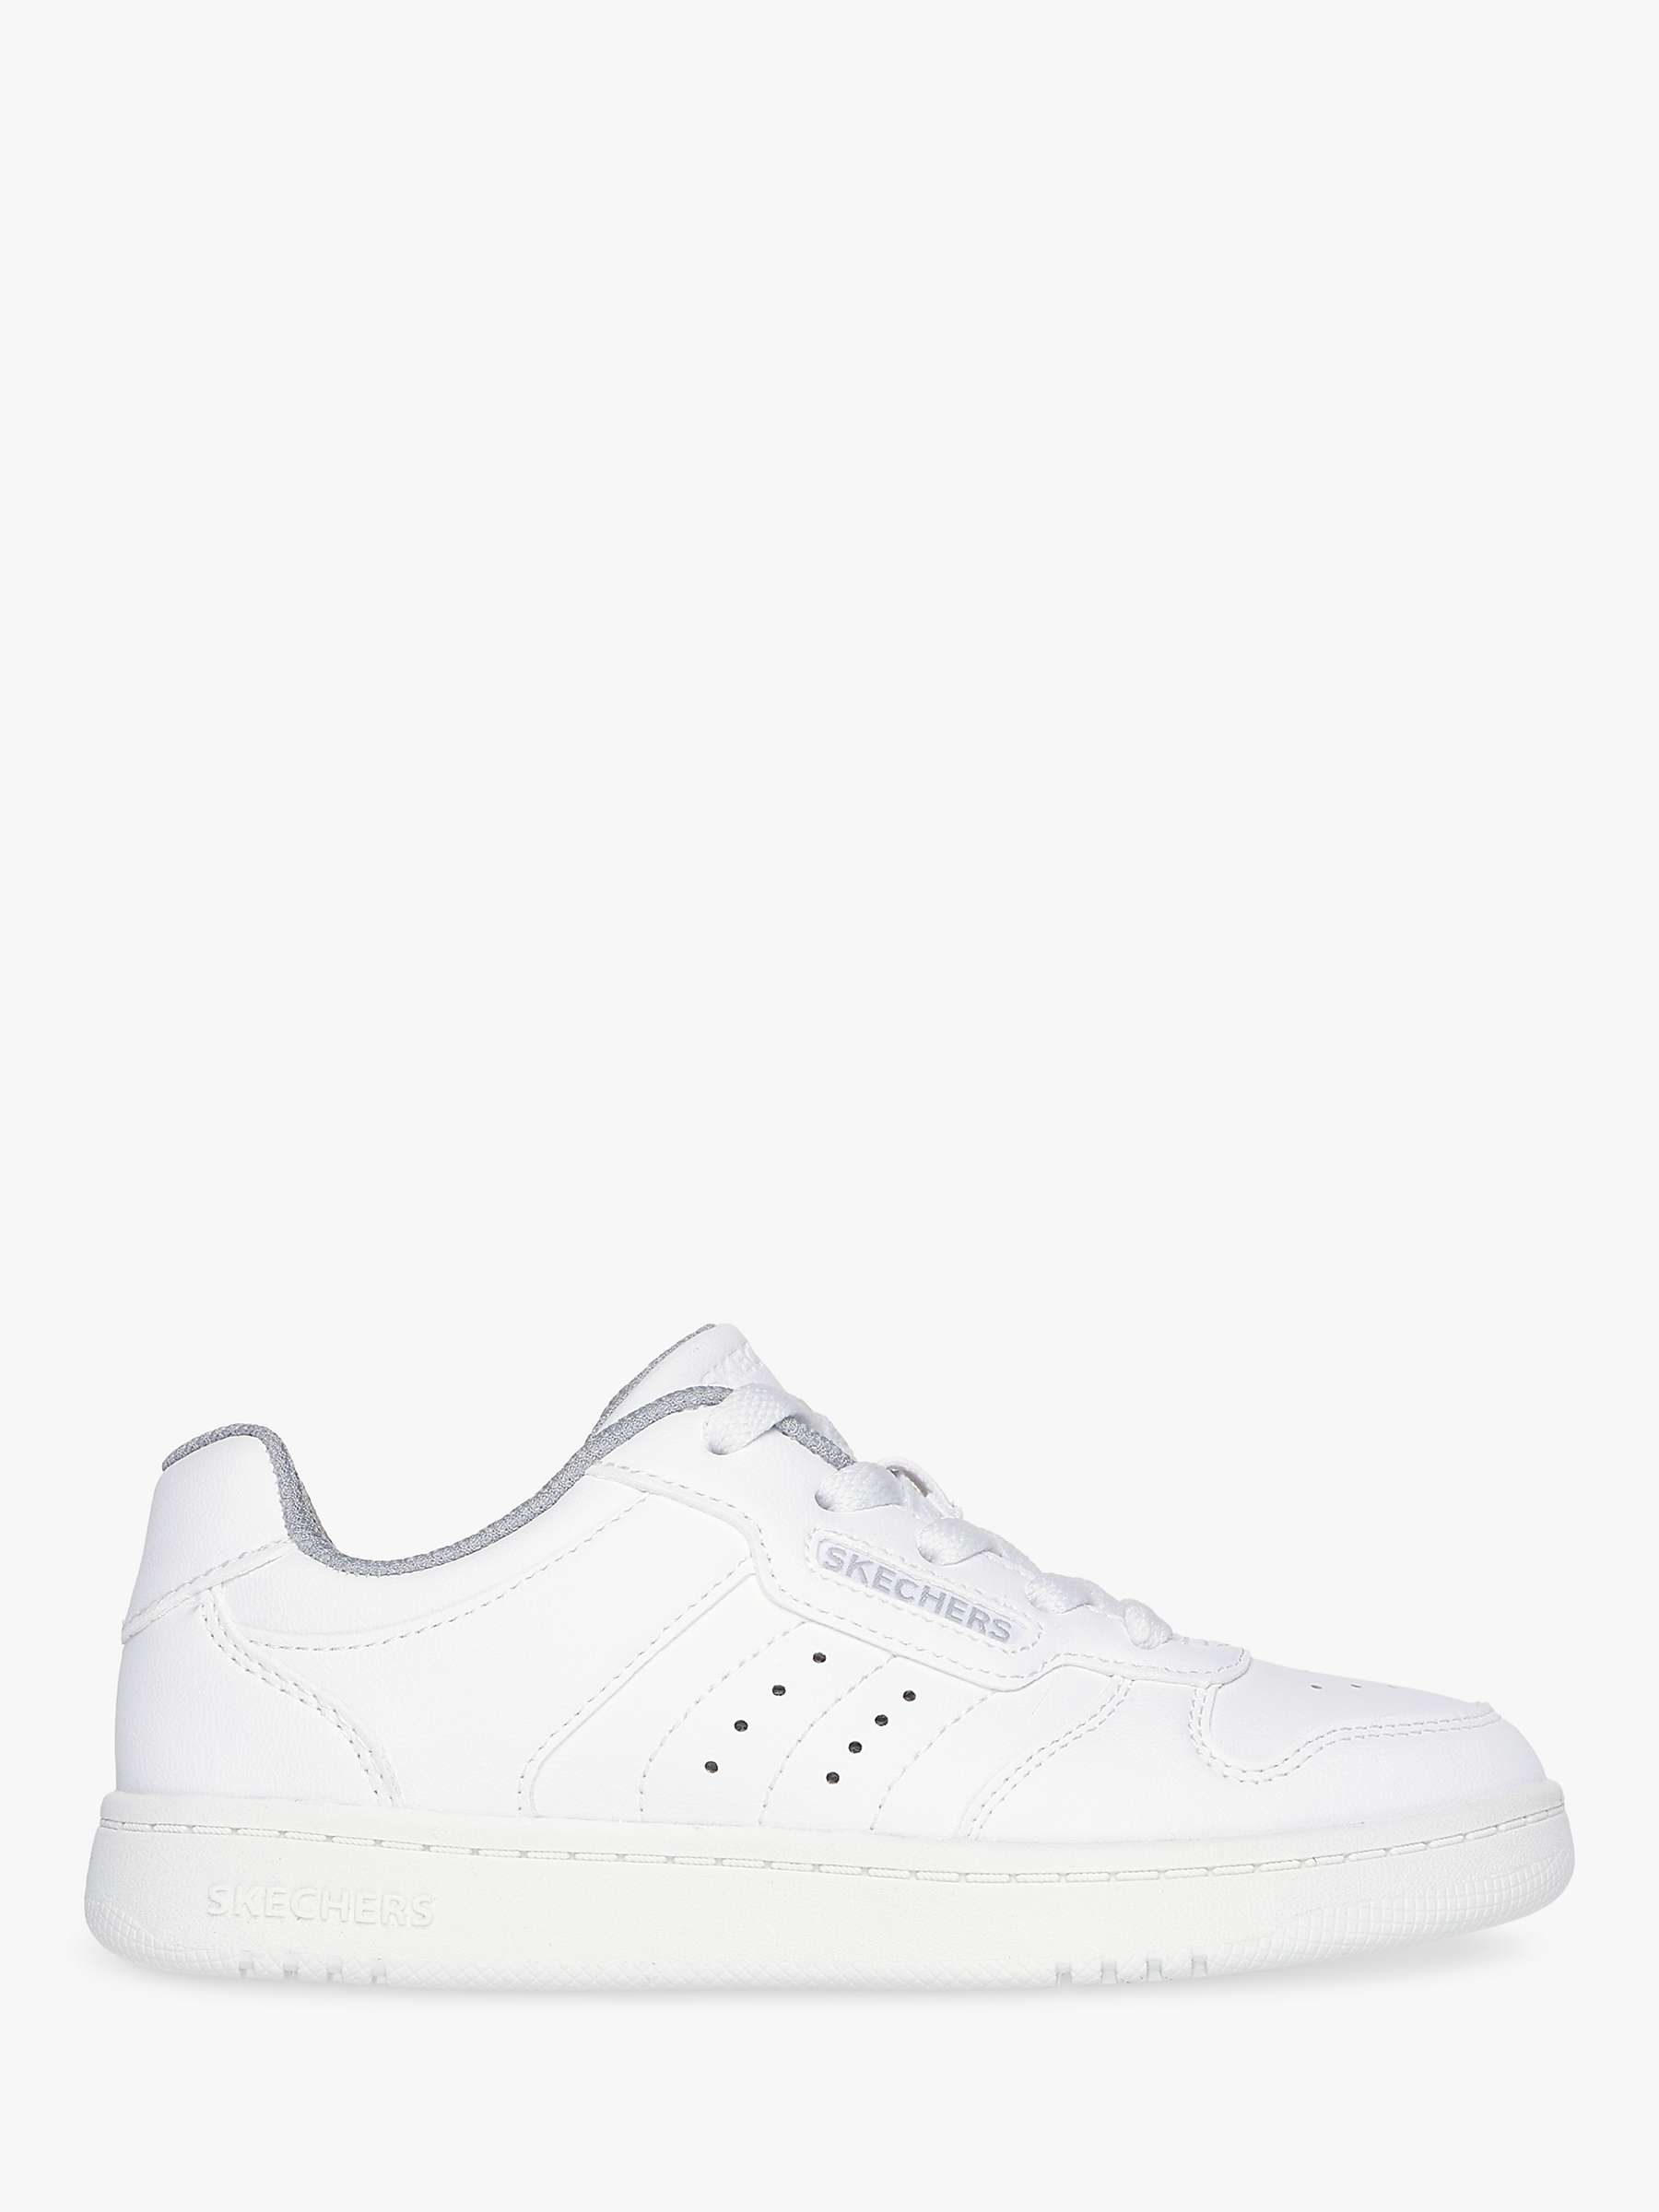 Buy Skechers Kids' Quick Street Trainers, White Online at johnlewis.com